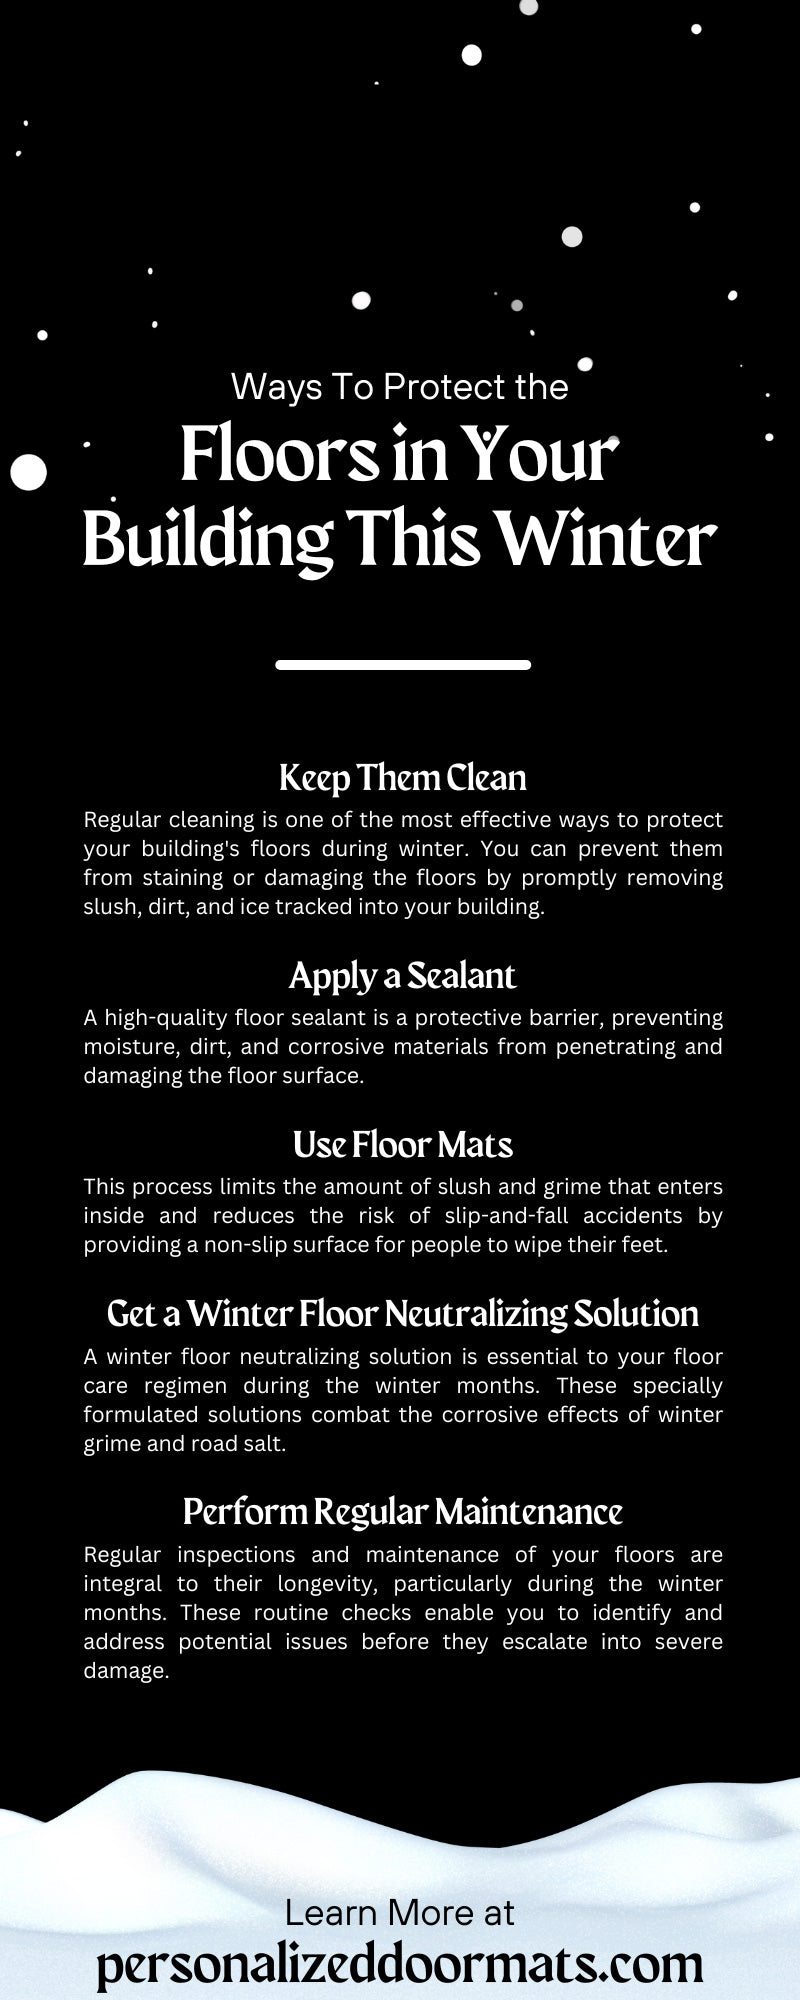 Ways To Protect the Floors in Your Building This Winter